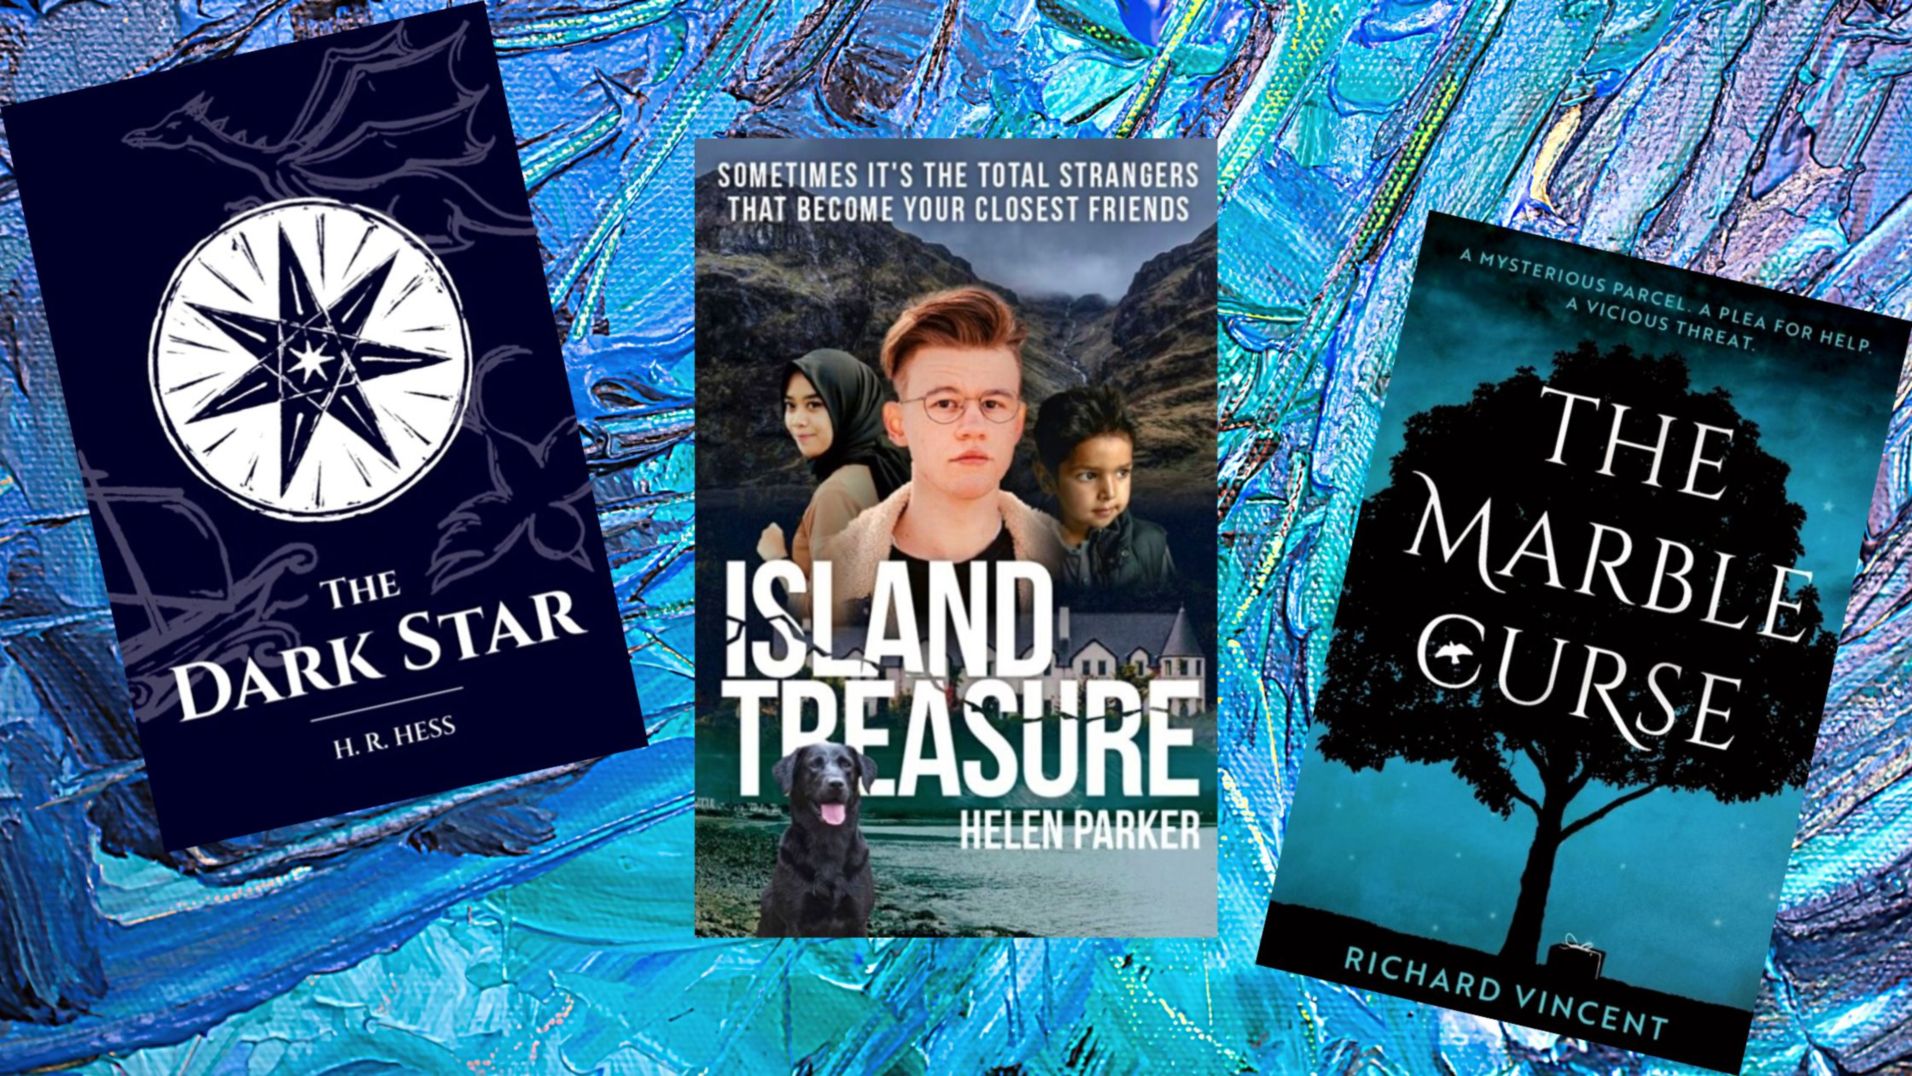 Reviews of three new fiction titles for teens